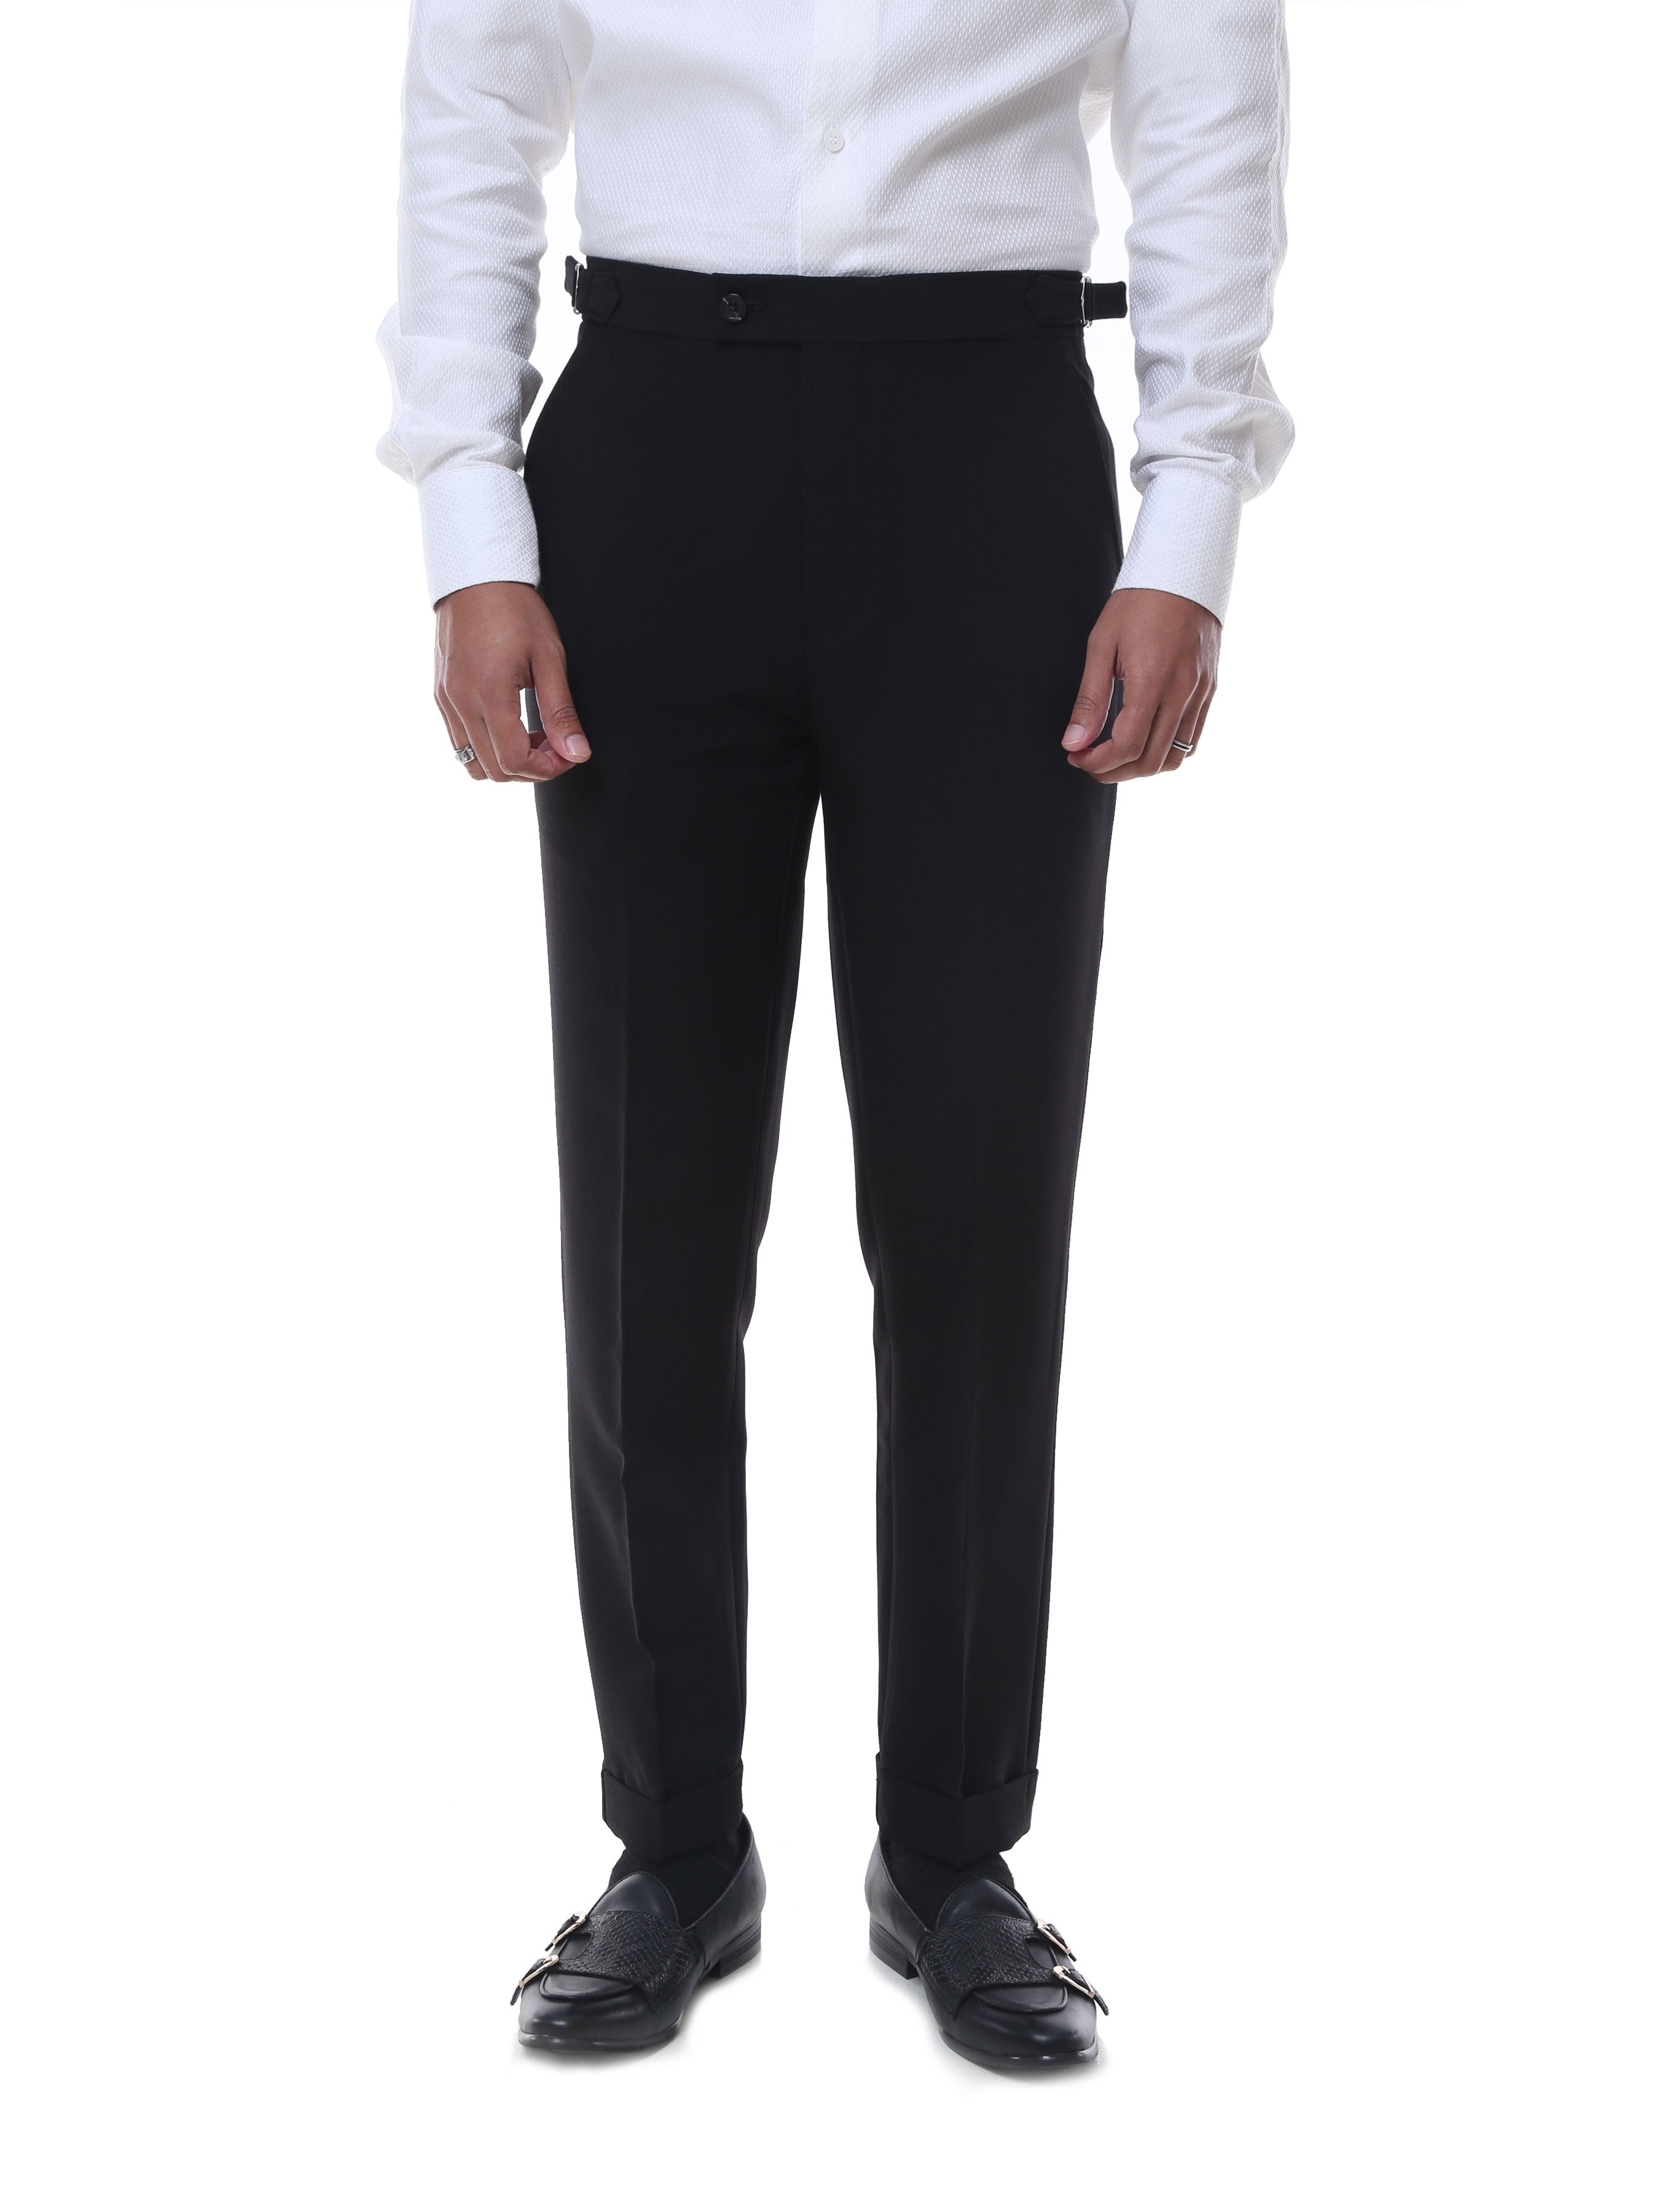 Trouser Support Illustrated  Bond Suits